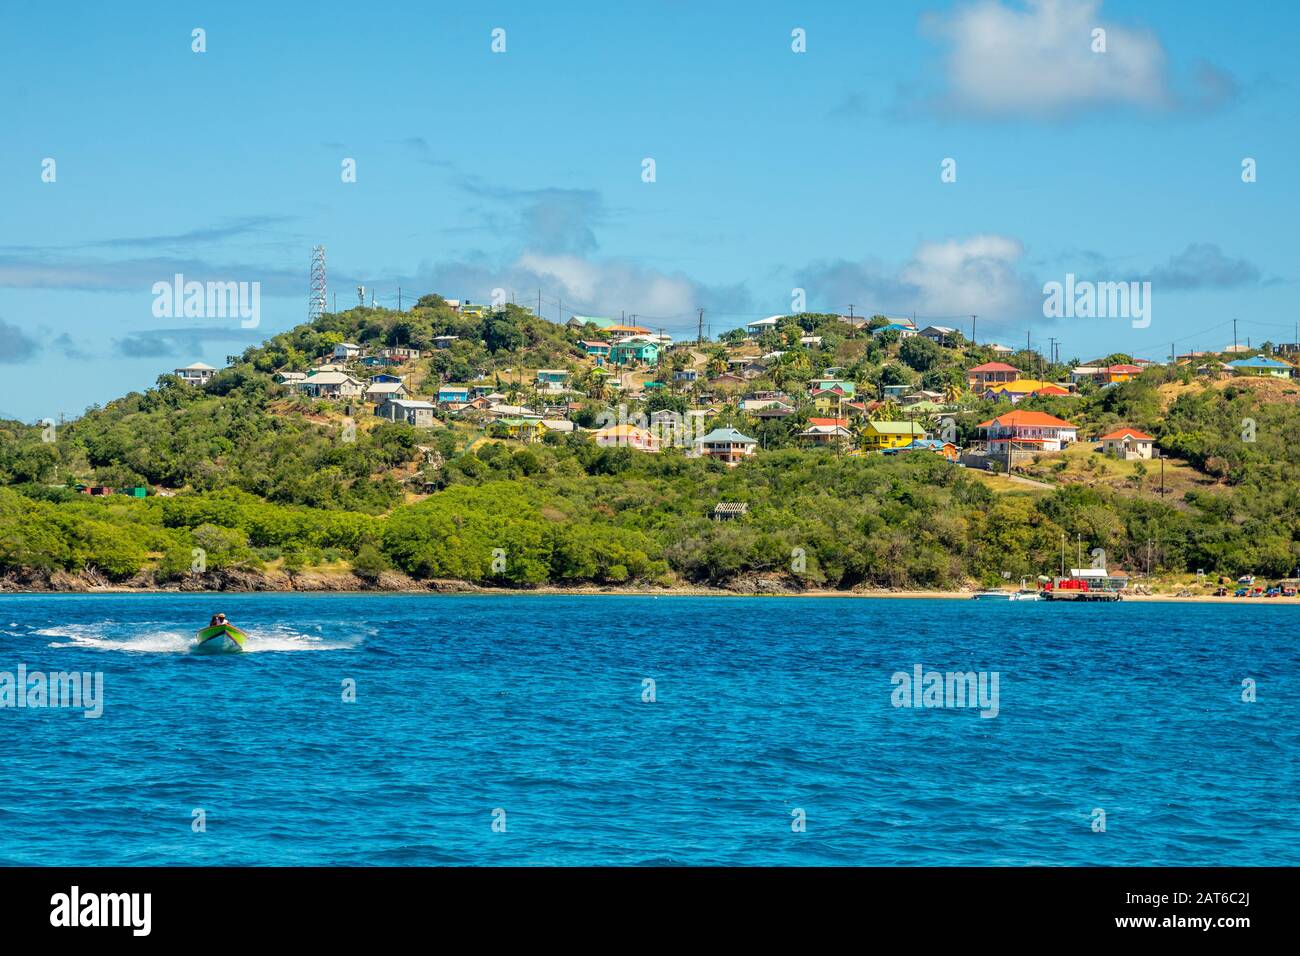 Residential houses at the bay, Mayreau island panorama, Saint Vincent and the Grenadines Stock Photo